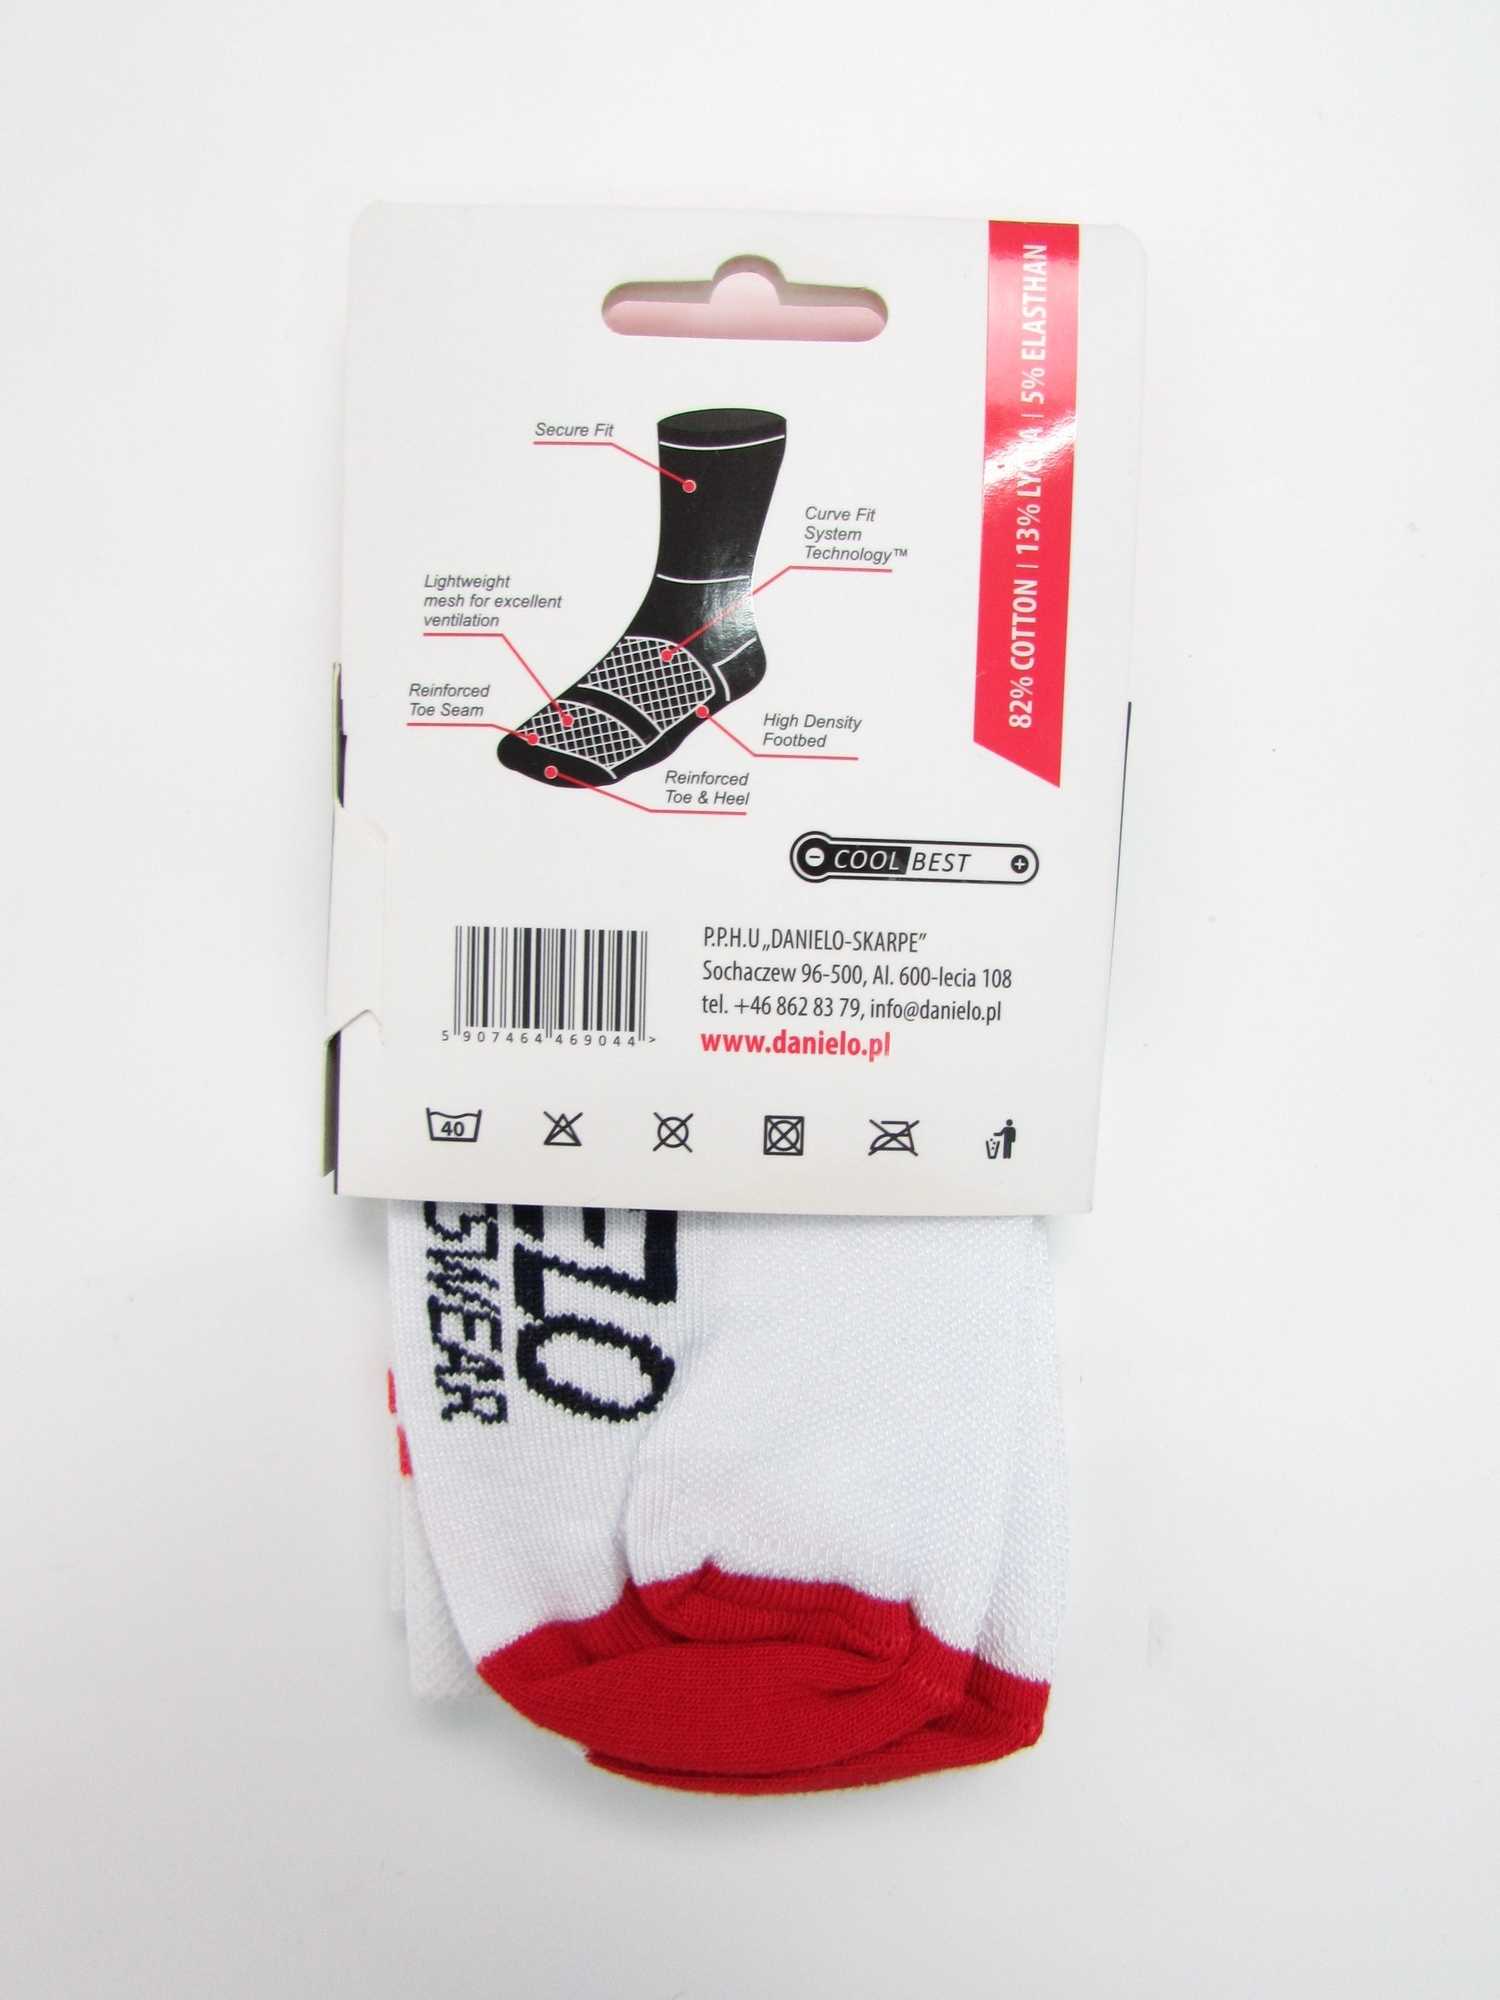 Danielo Professional Cycling Socks white/red size 37-39 (S)